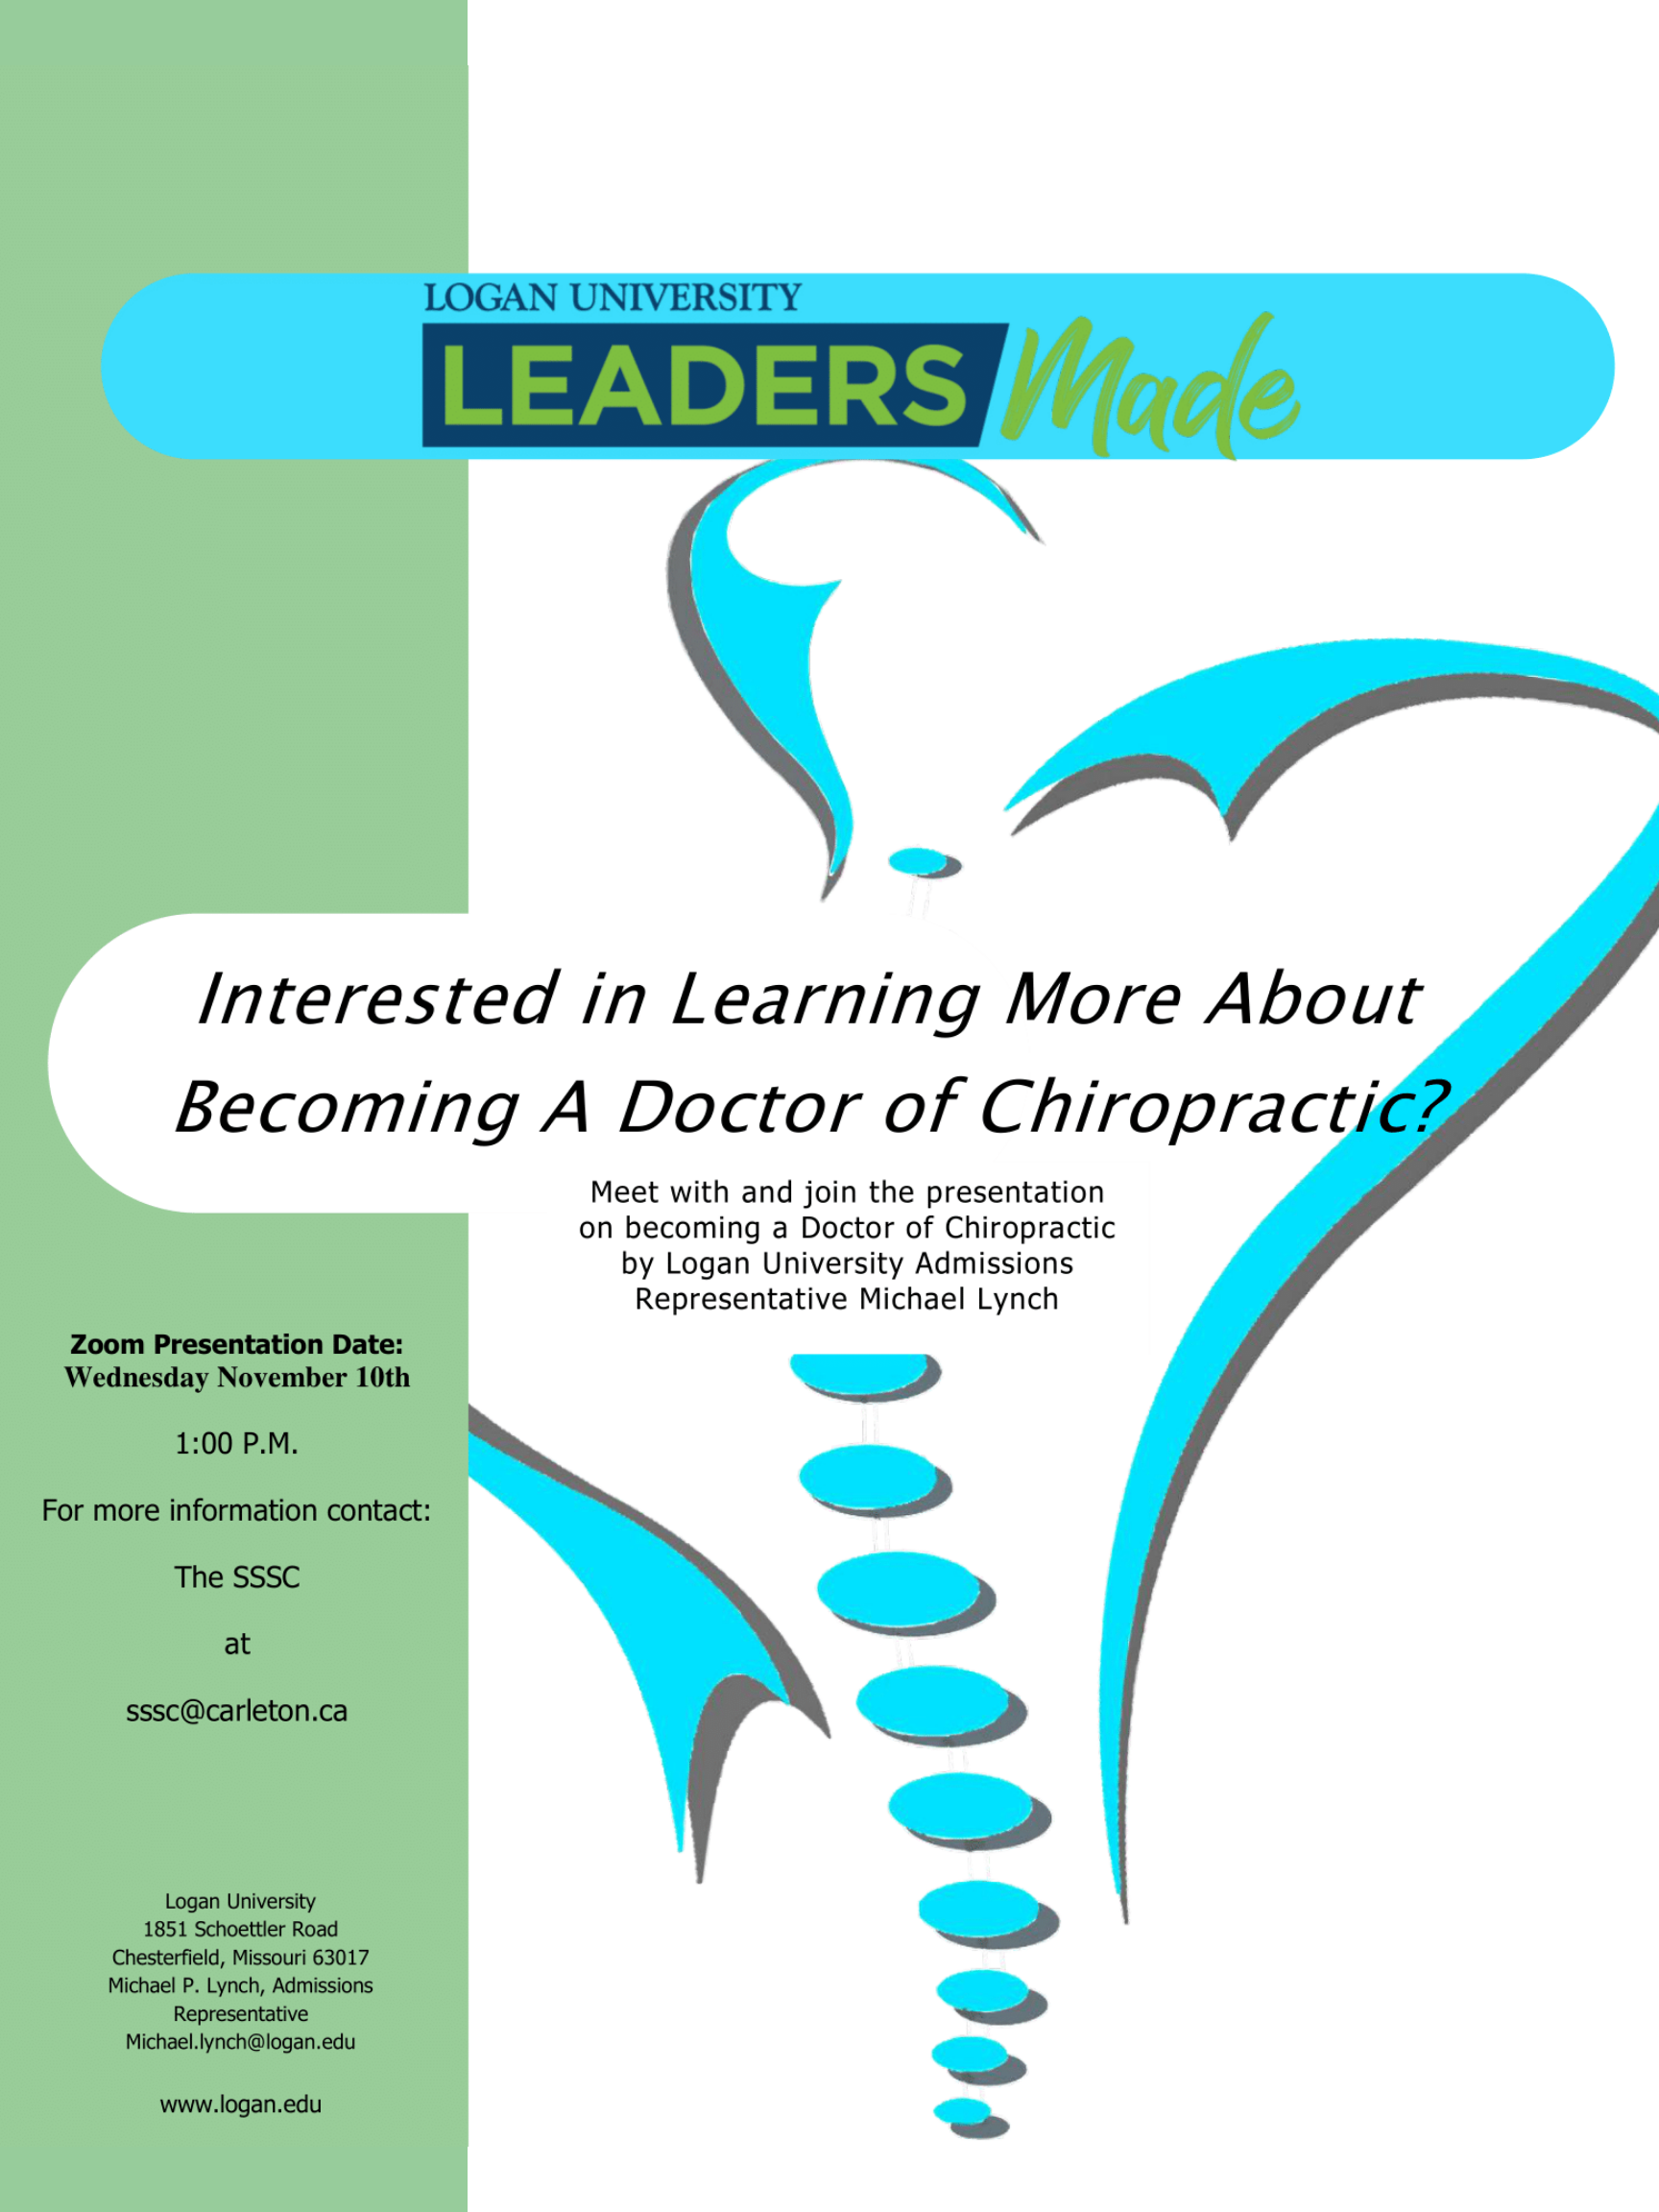 Poster for Chiropractic Info Session. Text reads "Logan University, Leaders Made. Interested in Learning More about Becoming a Doctor of Chiropractic? Meet with and join the presentation on becoming a Doctor of Chiropractic by Logan University Admissions Representative Michael Lynch. Zoom Presentation Date: Wednesday, November 10th, 1:00pm. For more information visit sssc.carleton.ca